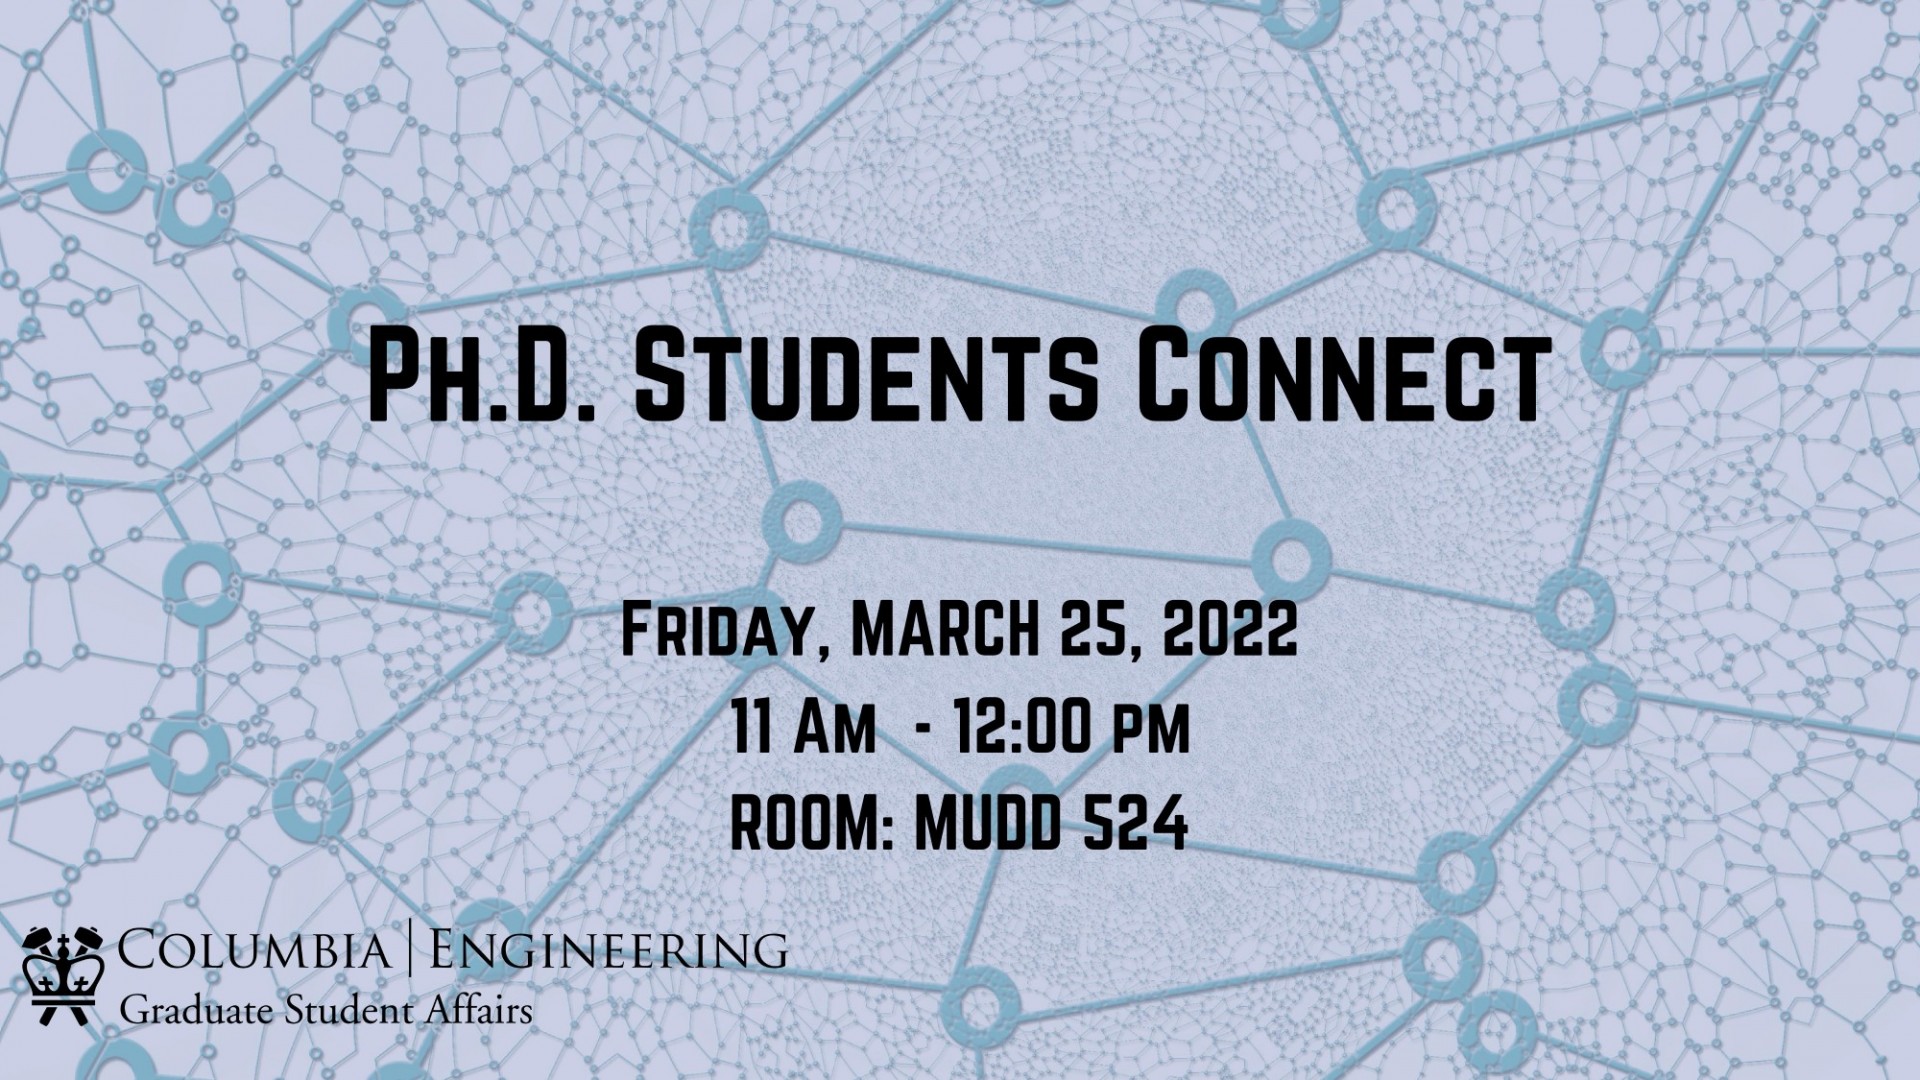 Ph.D. Students Connect